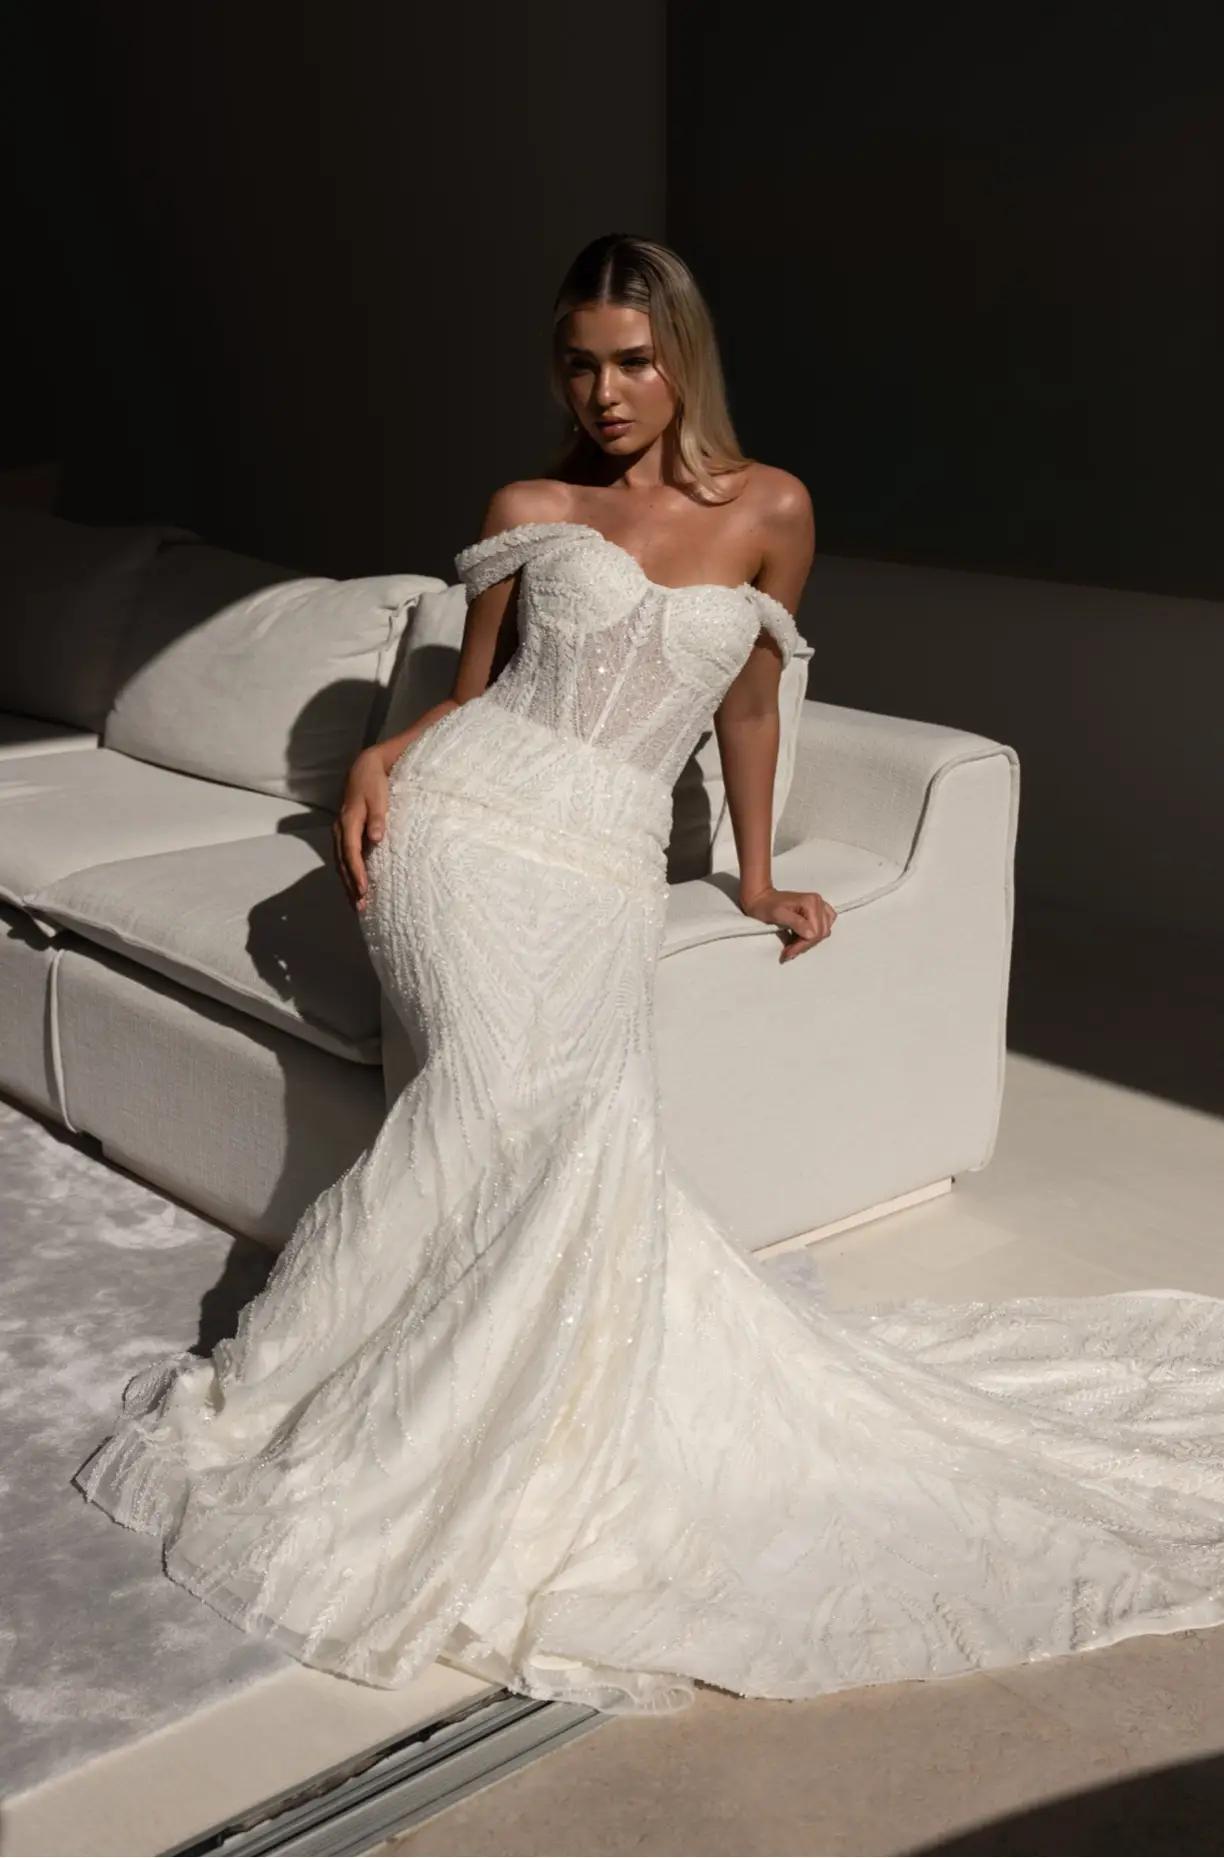 Photo of the model in a white gown